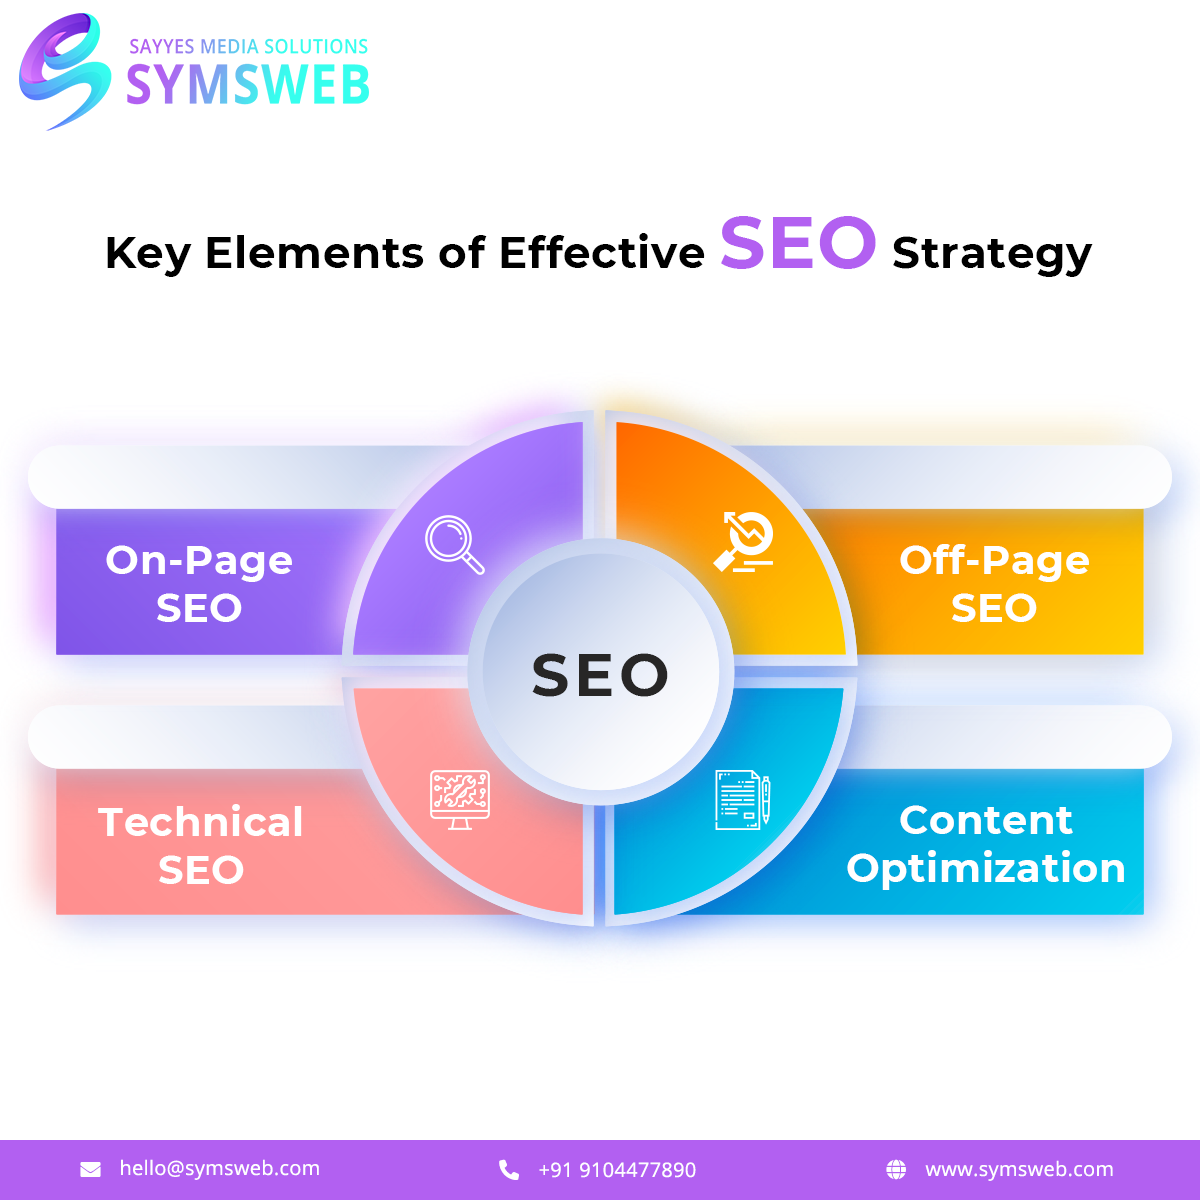 Content Should Be SEO Optimized and Well-Researched